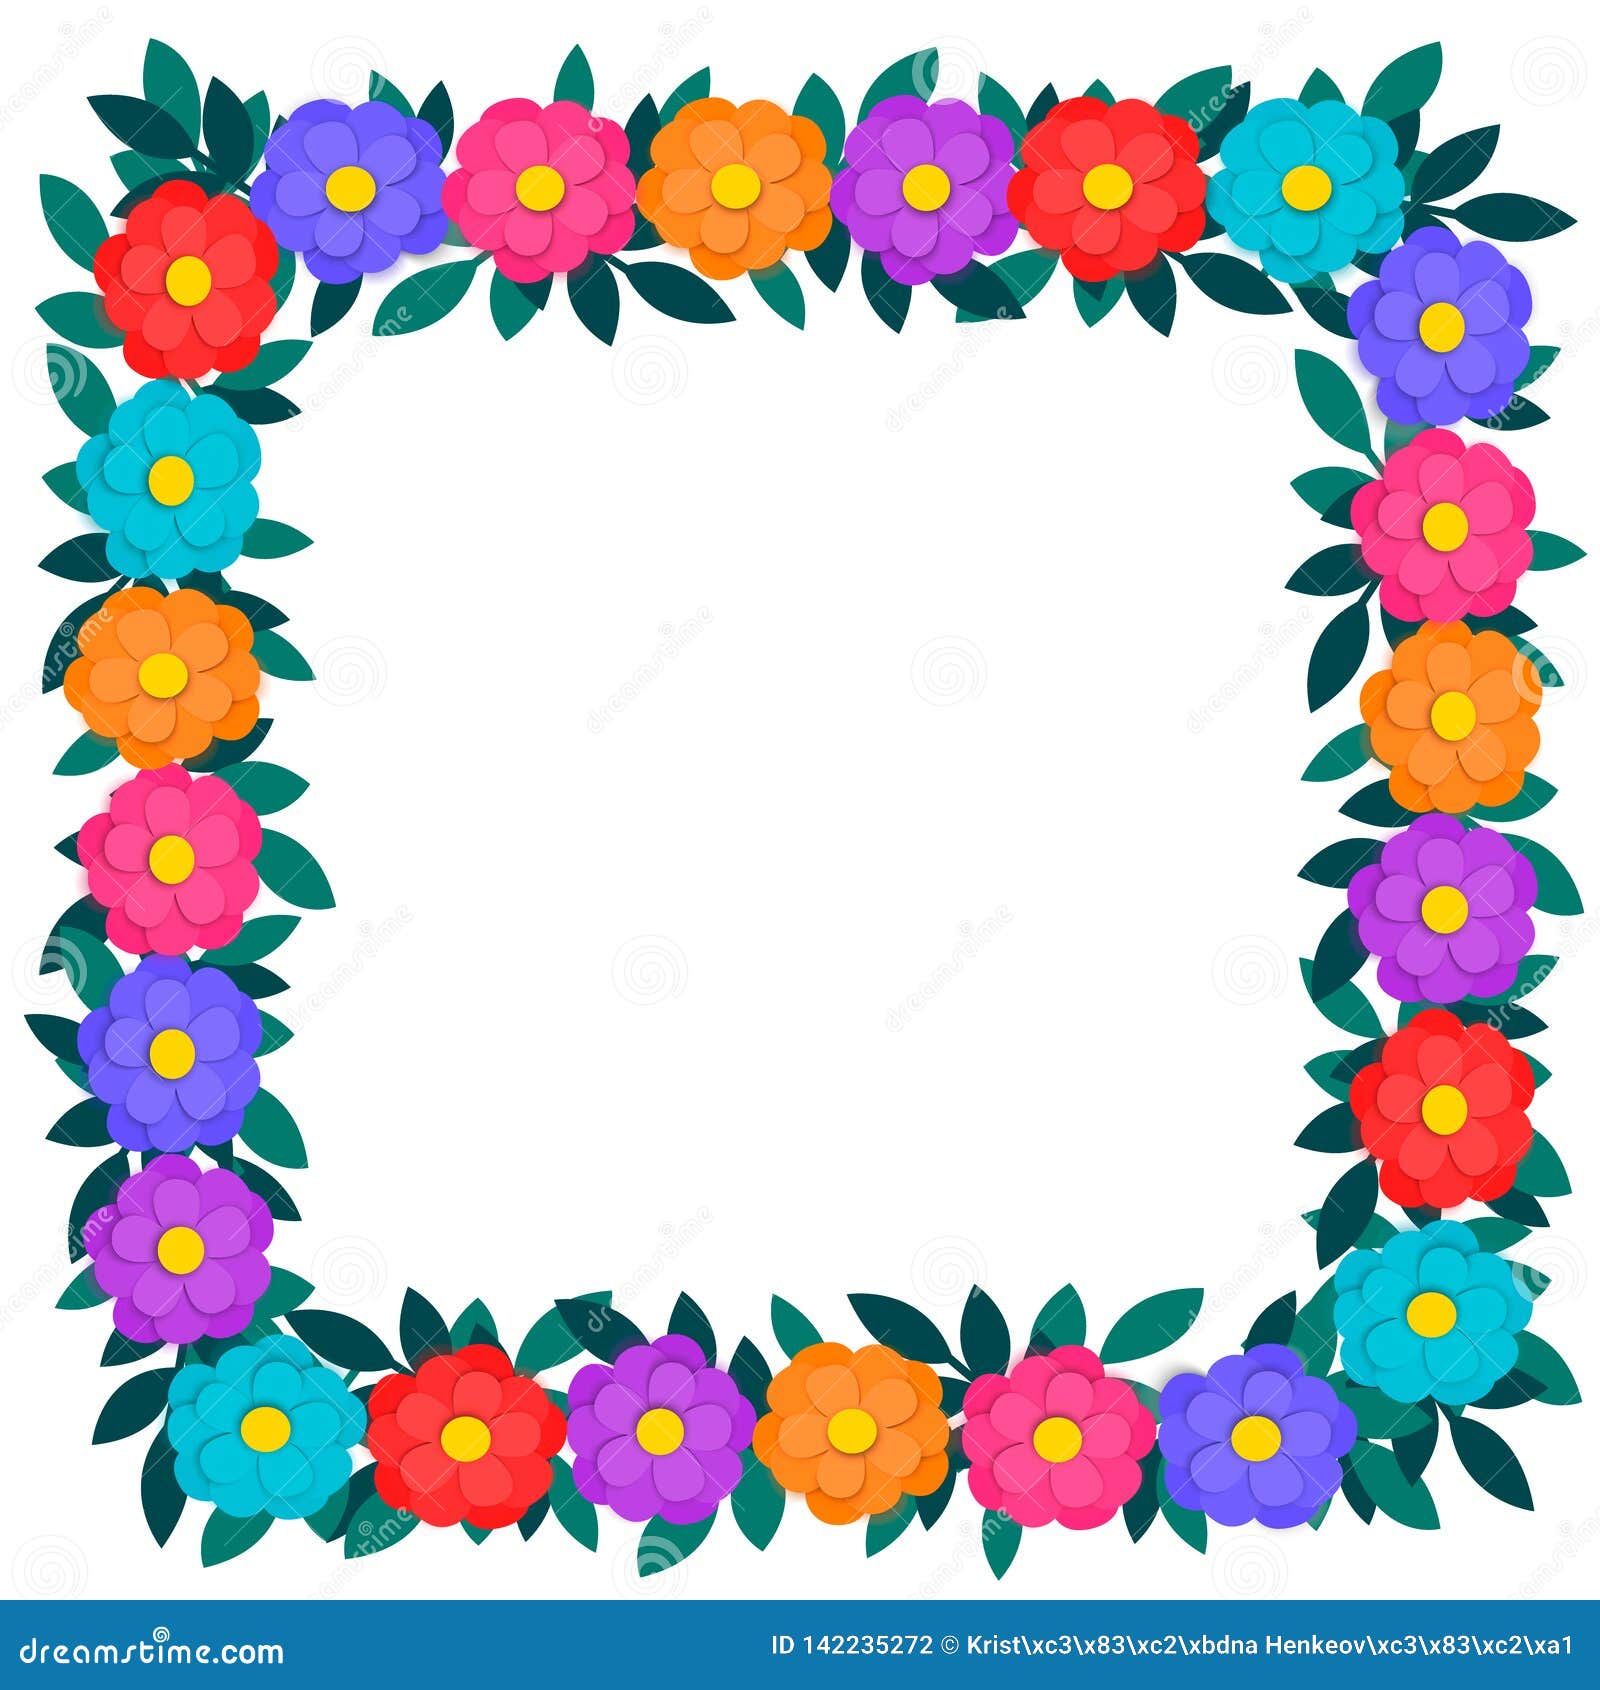 Colorful Paper Cut Out Flowers and Green Leaves Floral Garland Square Frame  or Border Isolated on White Background with Stock Vector - Illustration of  border, graphic: 142235272